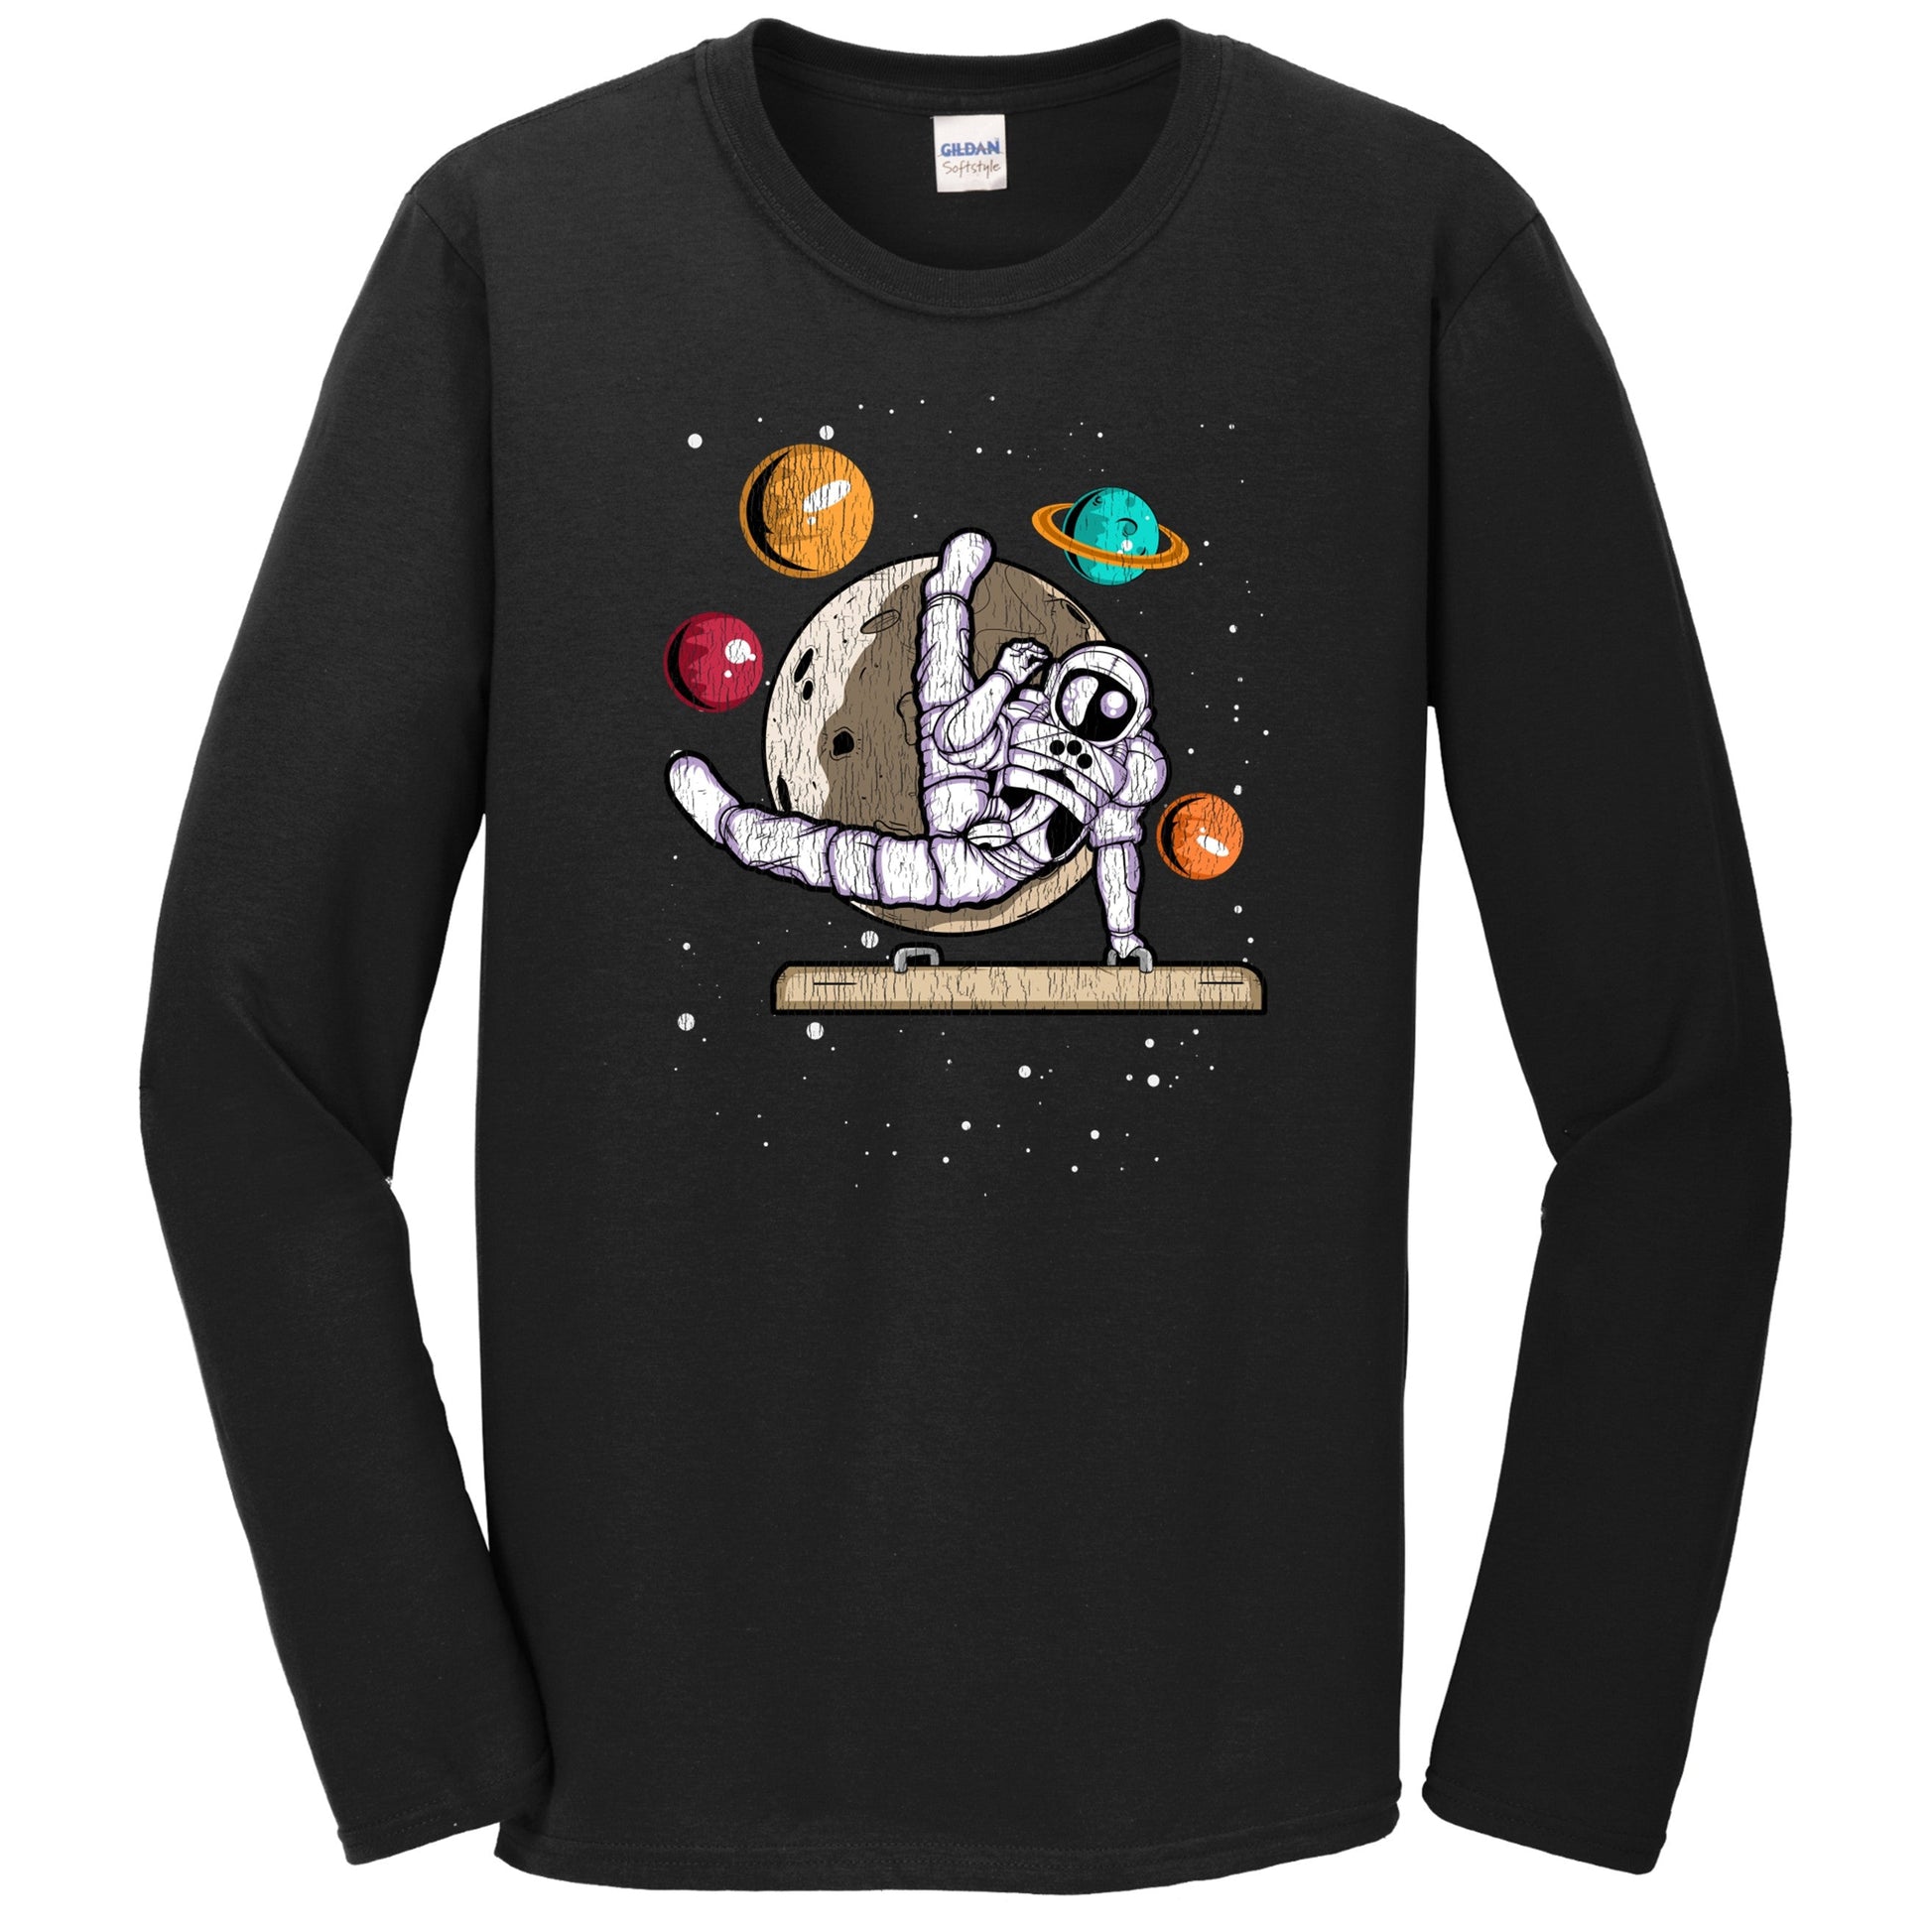 Male Gymnast Astronaut Outer Space Spaceman Gymnastics Distressed Long Sleeve T-Shirt